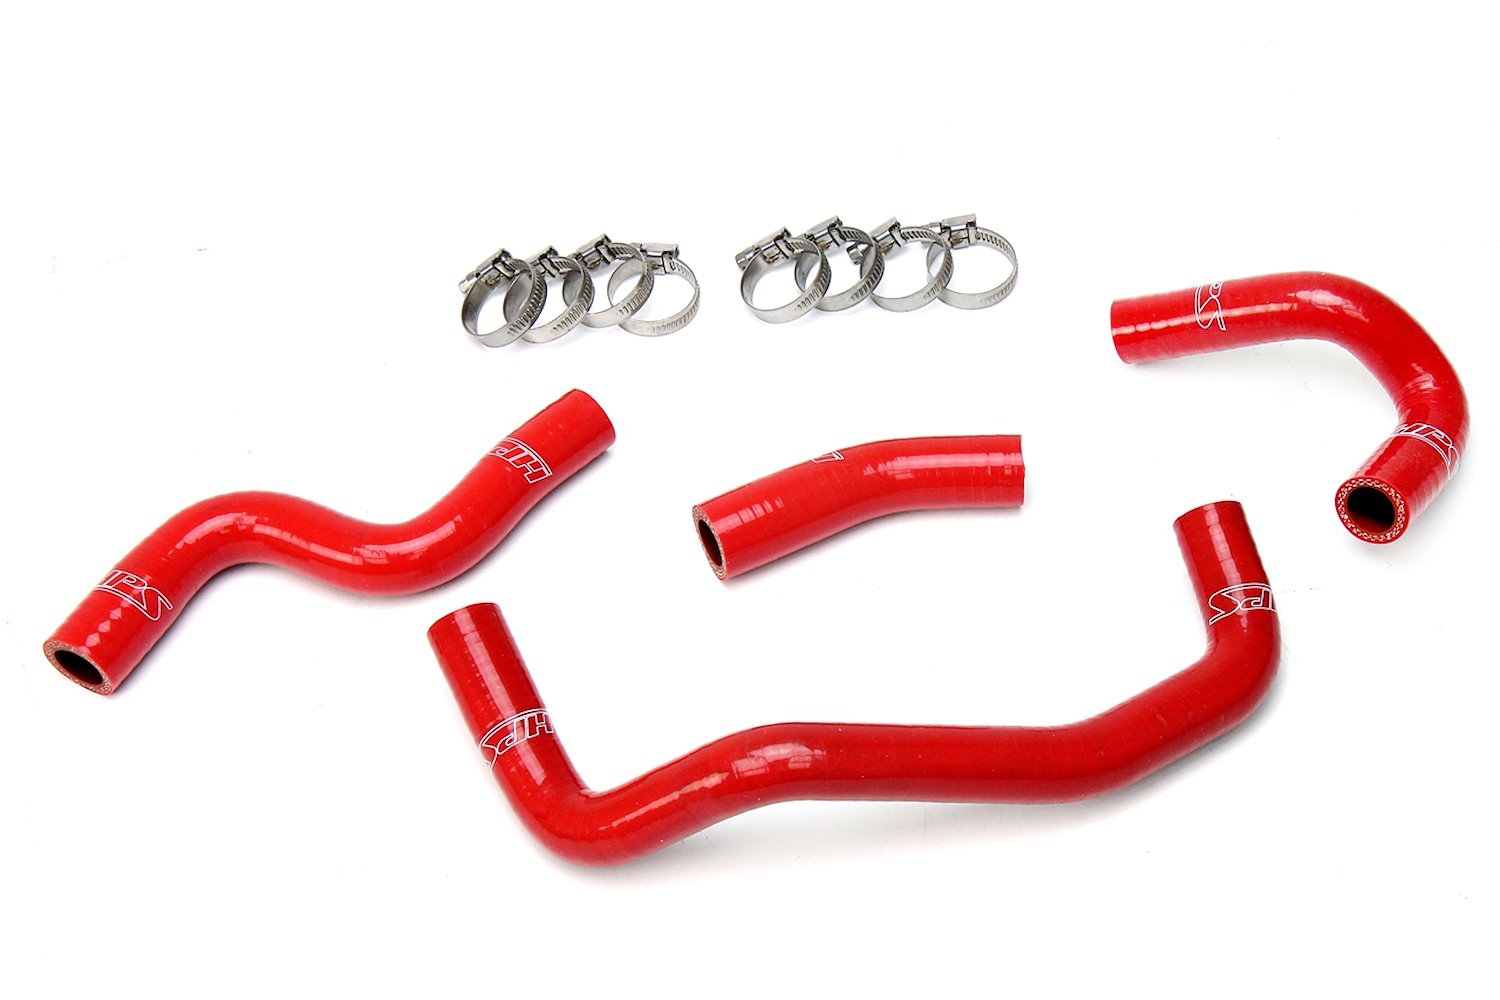 57-1508-RED Heater Hose Kit, High-Temp 3-Ply Reinforced Silicone, Replace OEM Rubber Heater Coolant Hoses